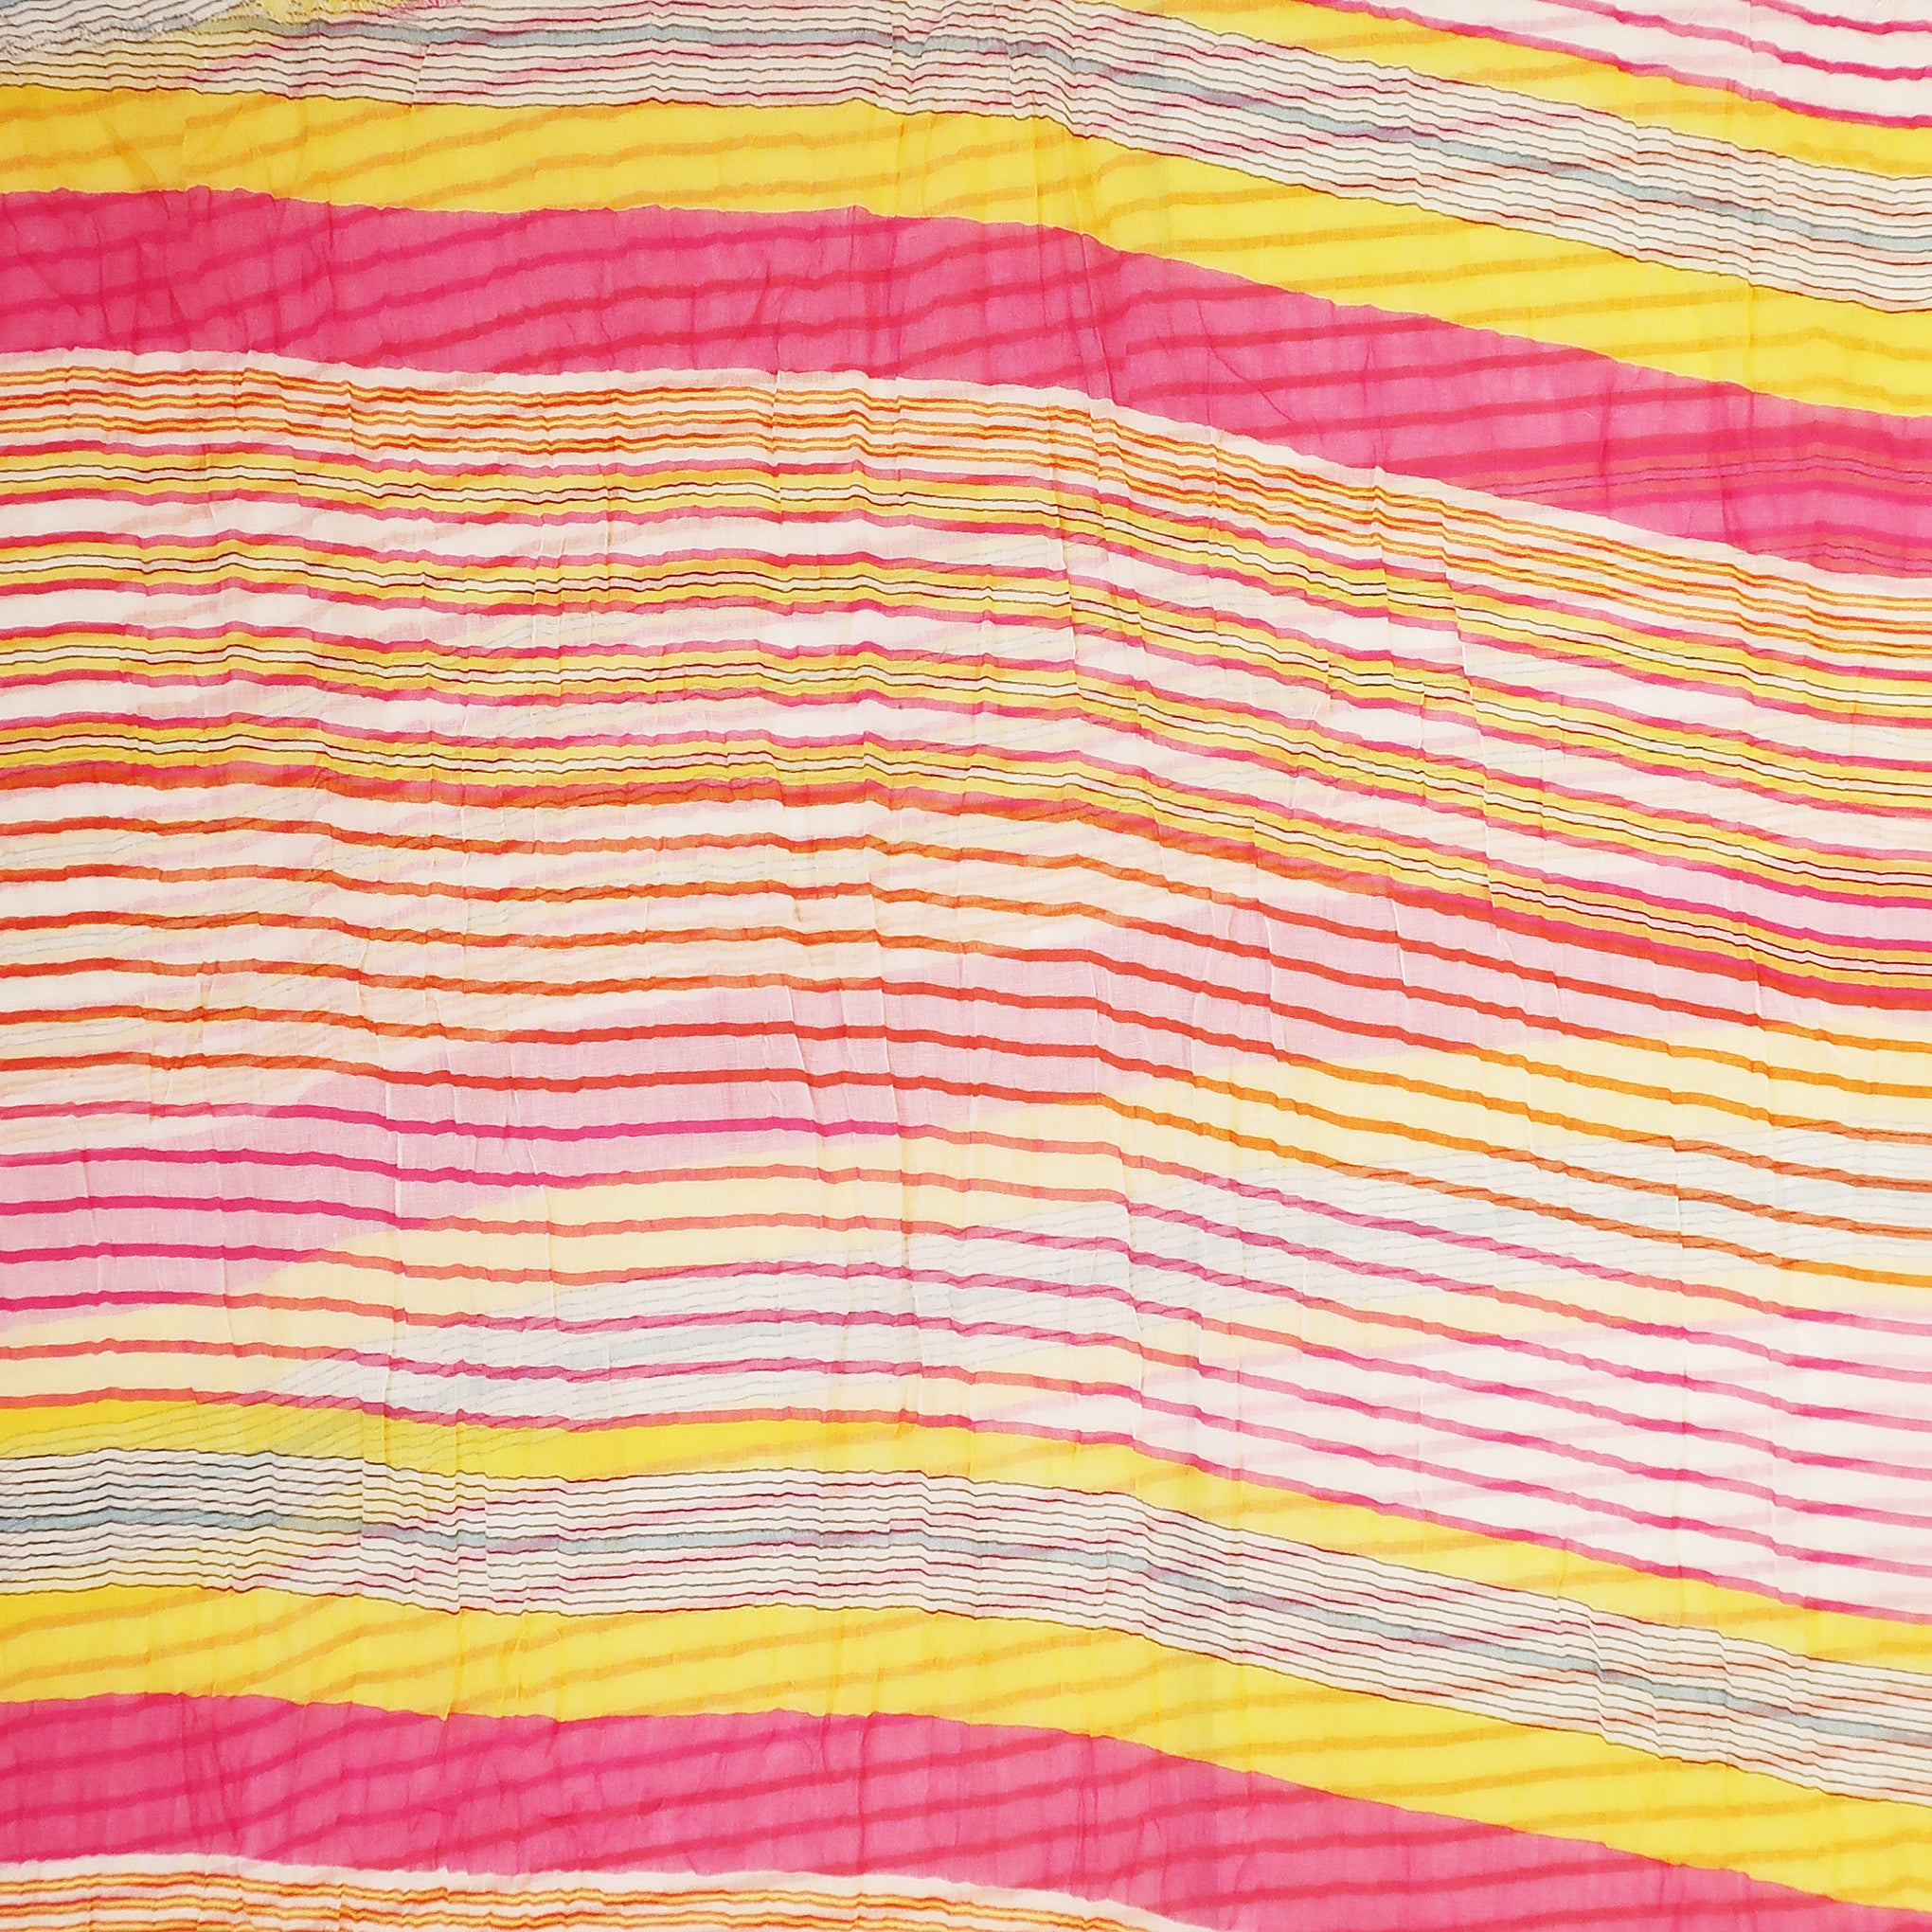 Blue Pacific Cotton Starburst Striped Scarf in Hot Pink and Yellow